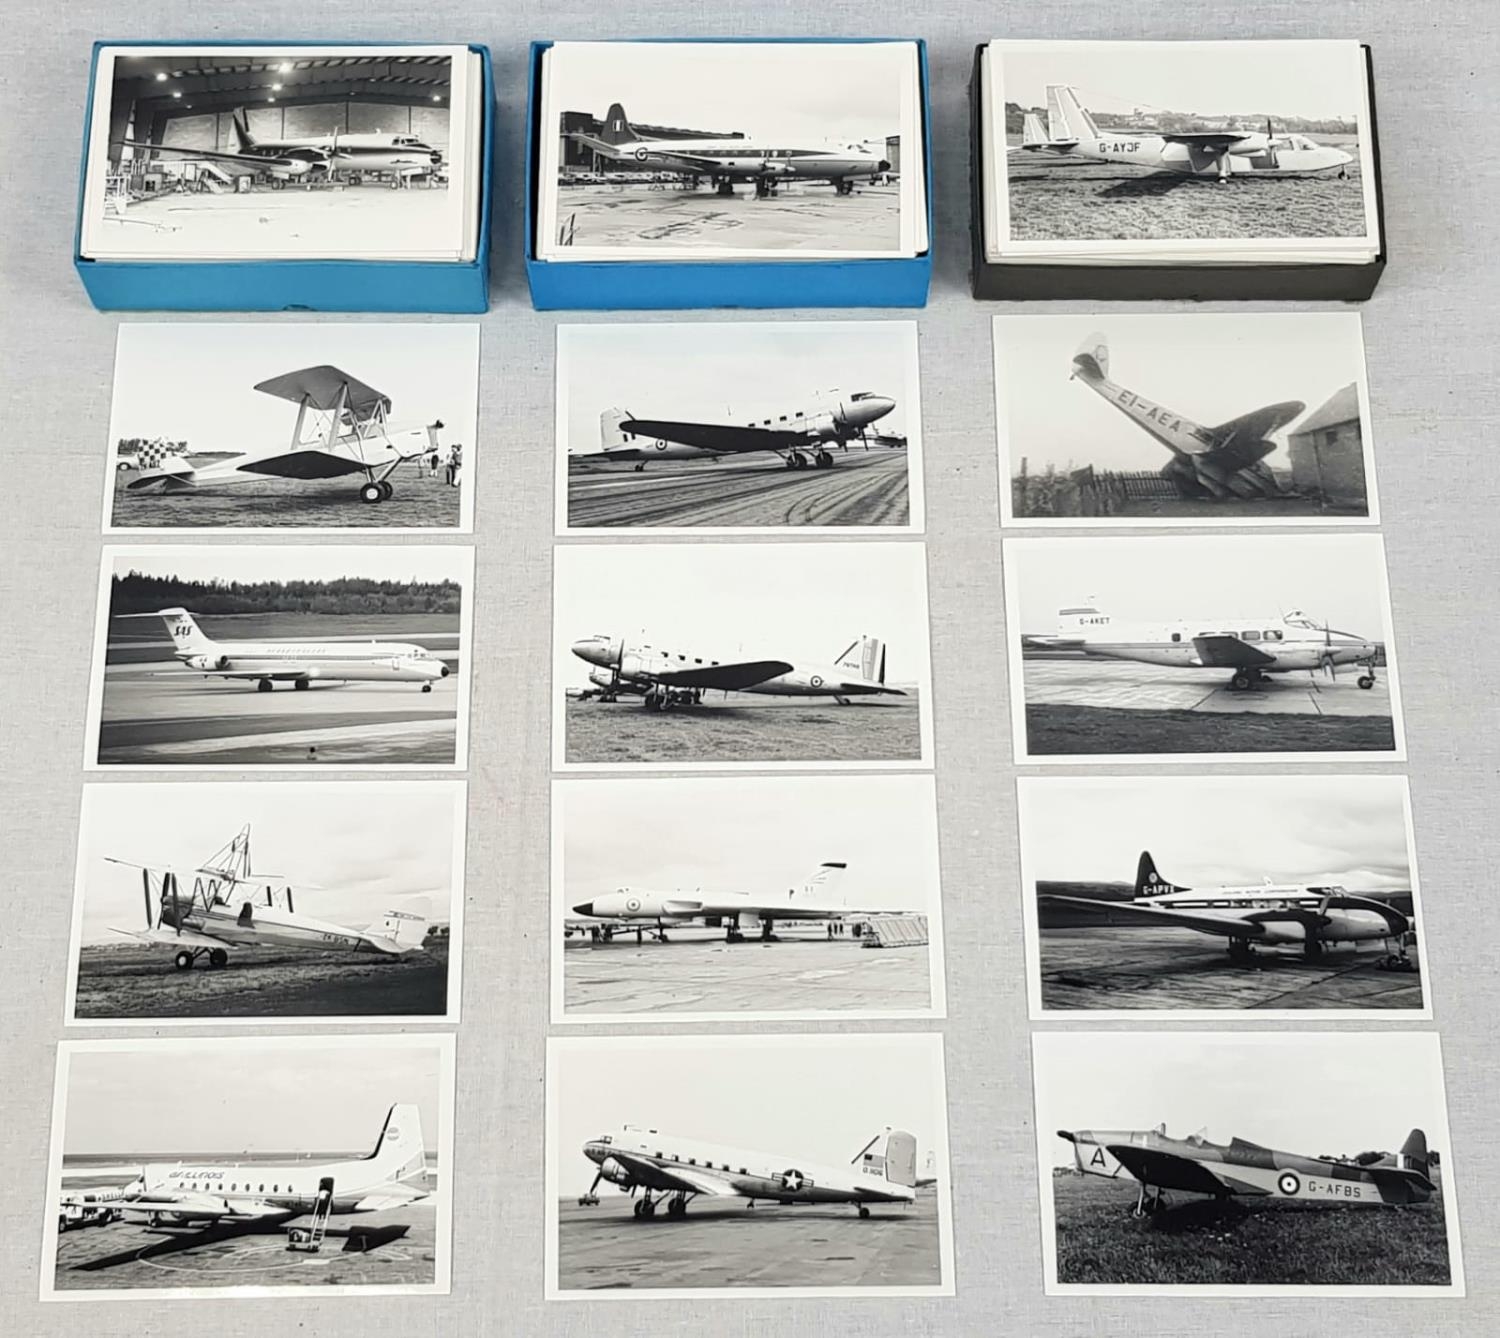 Over 400 Original Black and White Aircraft Photographs. Contains pictures taken from the 1960s to